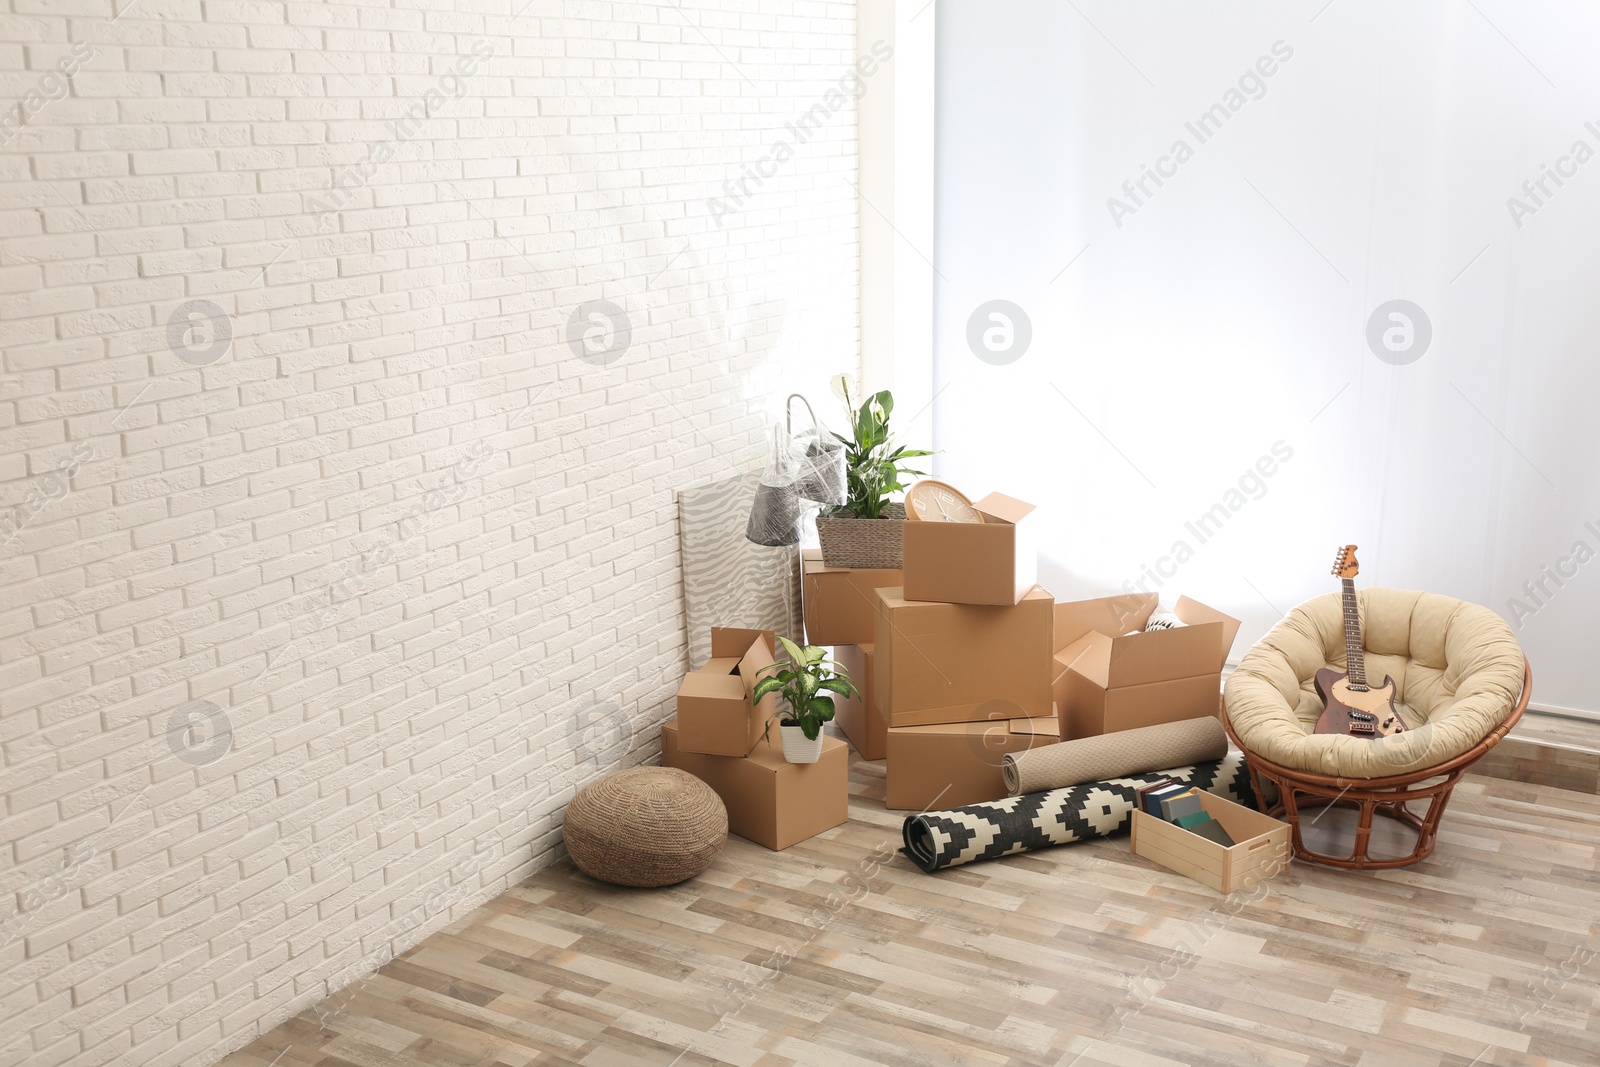 Photo of Moving boxes and stuff near white brick wall in room